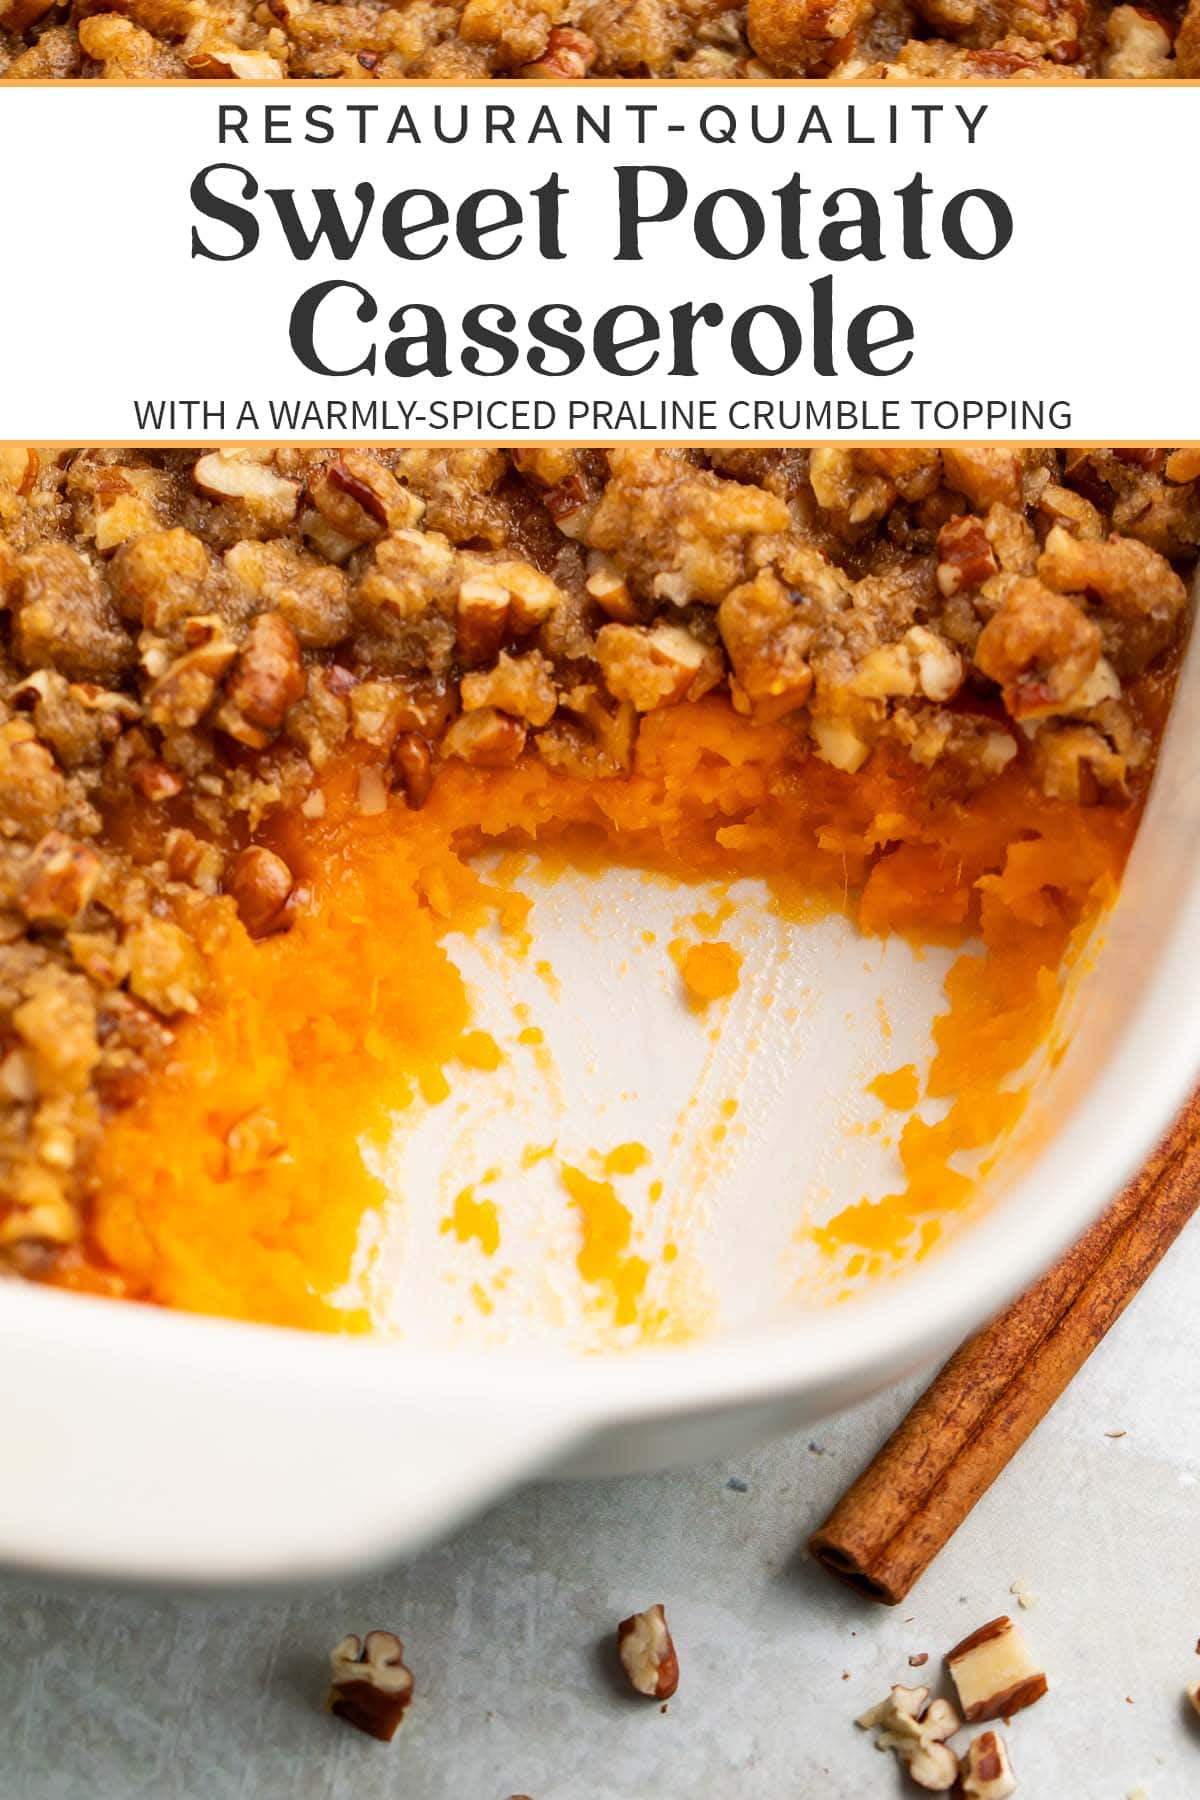 Pin graphic for Ruth's Chris sweet potato casserole.